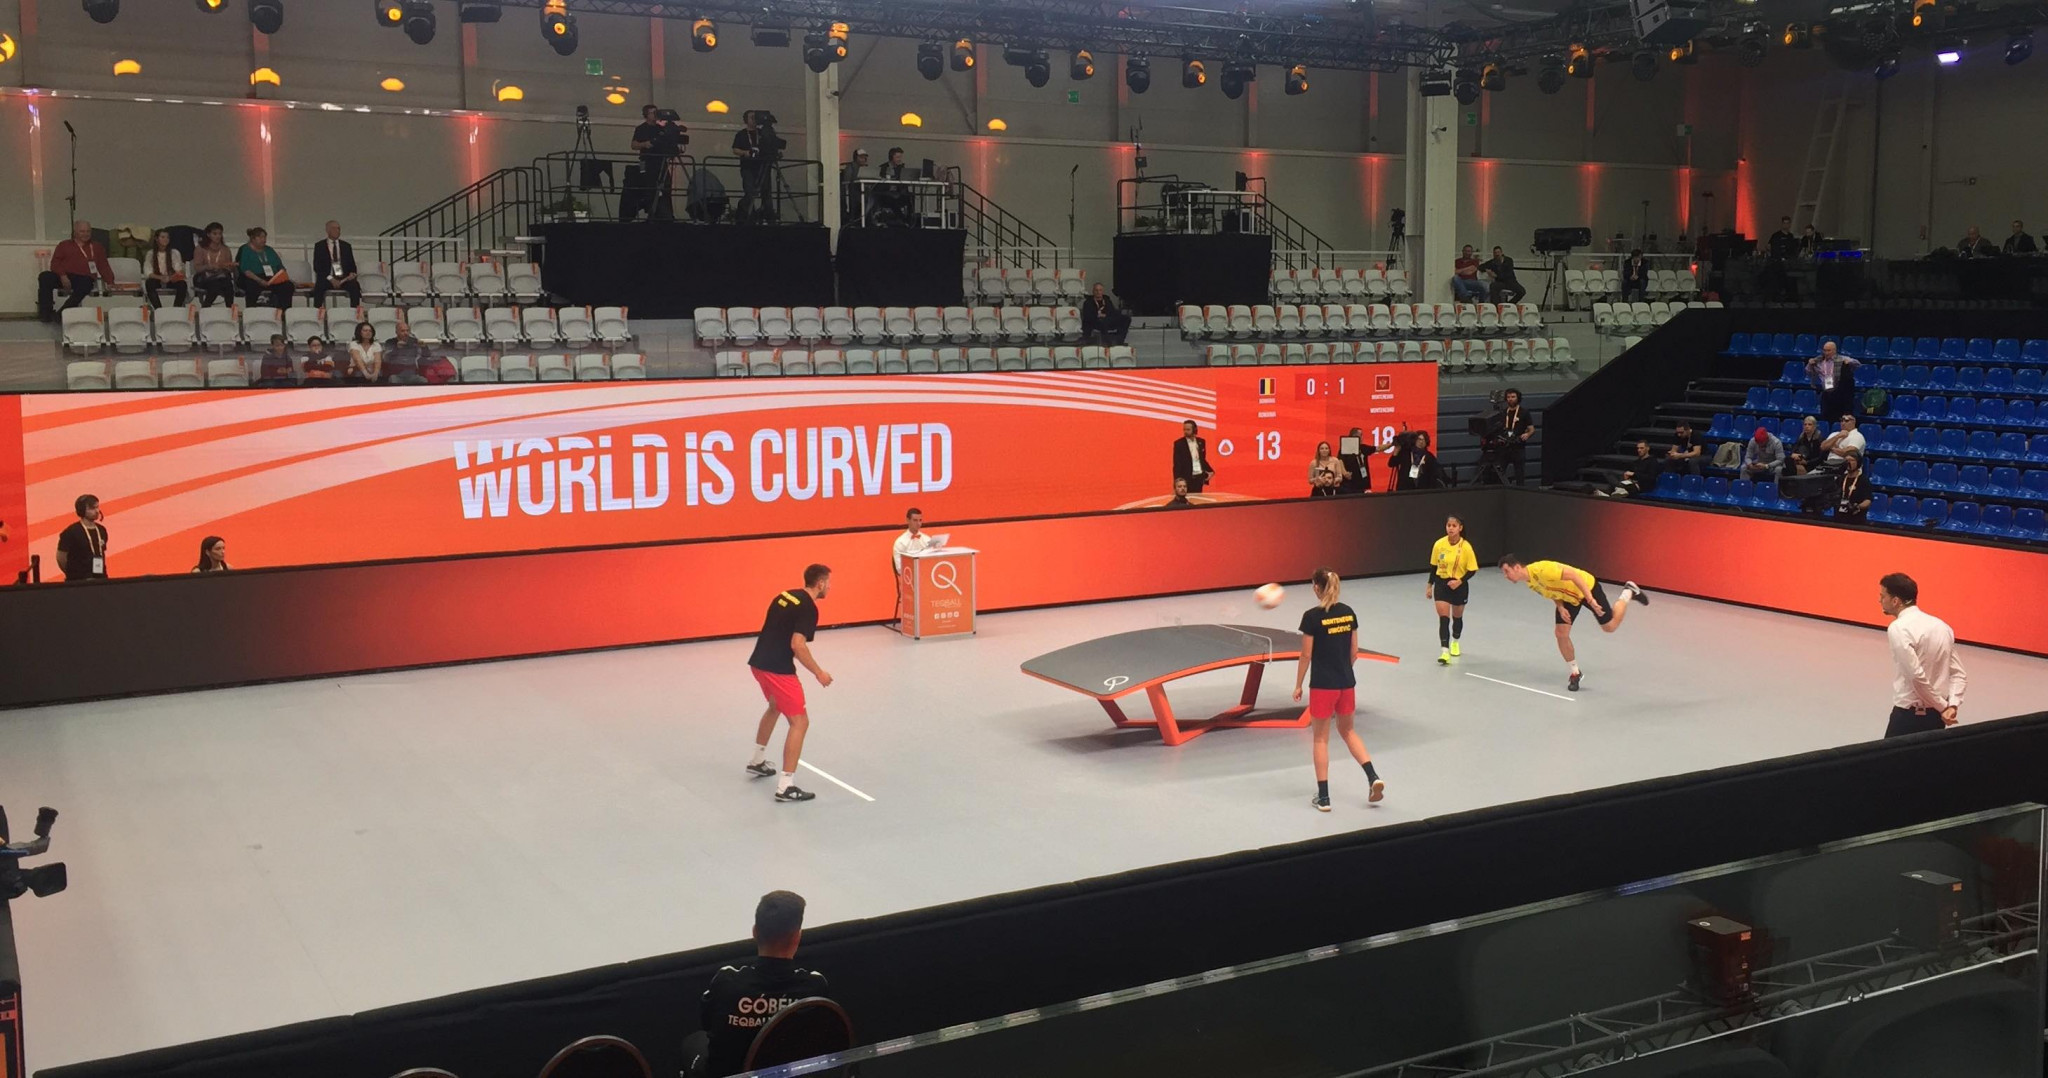 FITEQ general secretary promises "equal opportunity" via new women's categories at Teqball World Championships